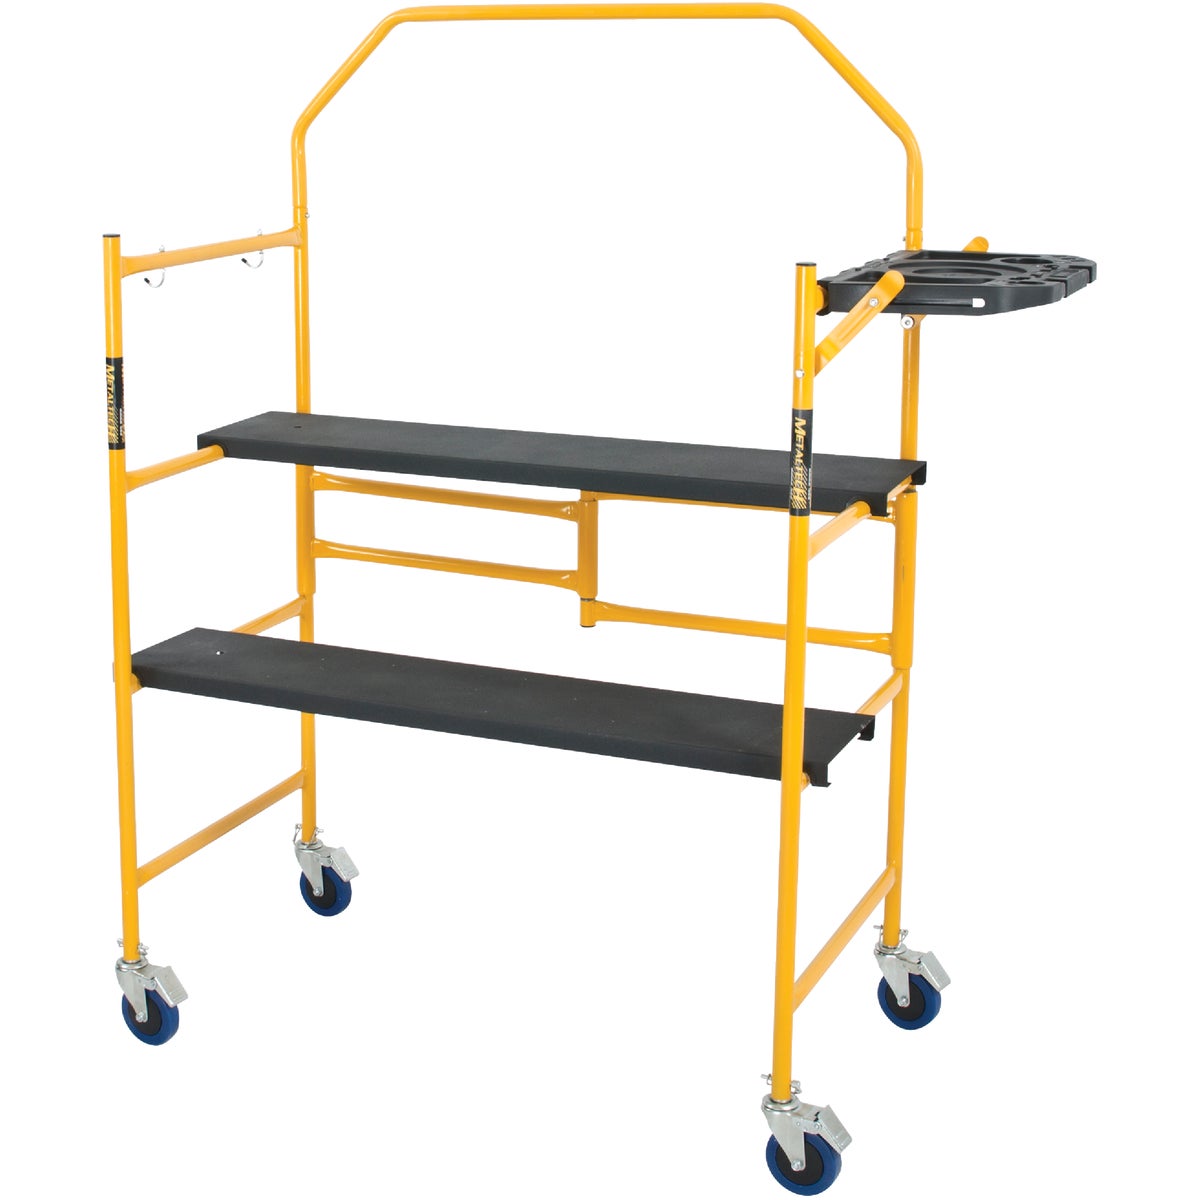 Item 771097, The 4' MetalTech mini folding steel work platform is a perfect solution for